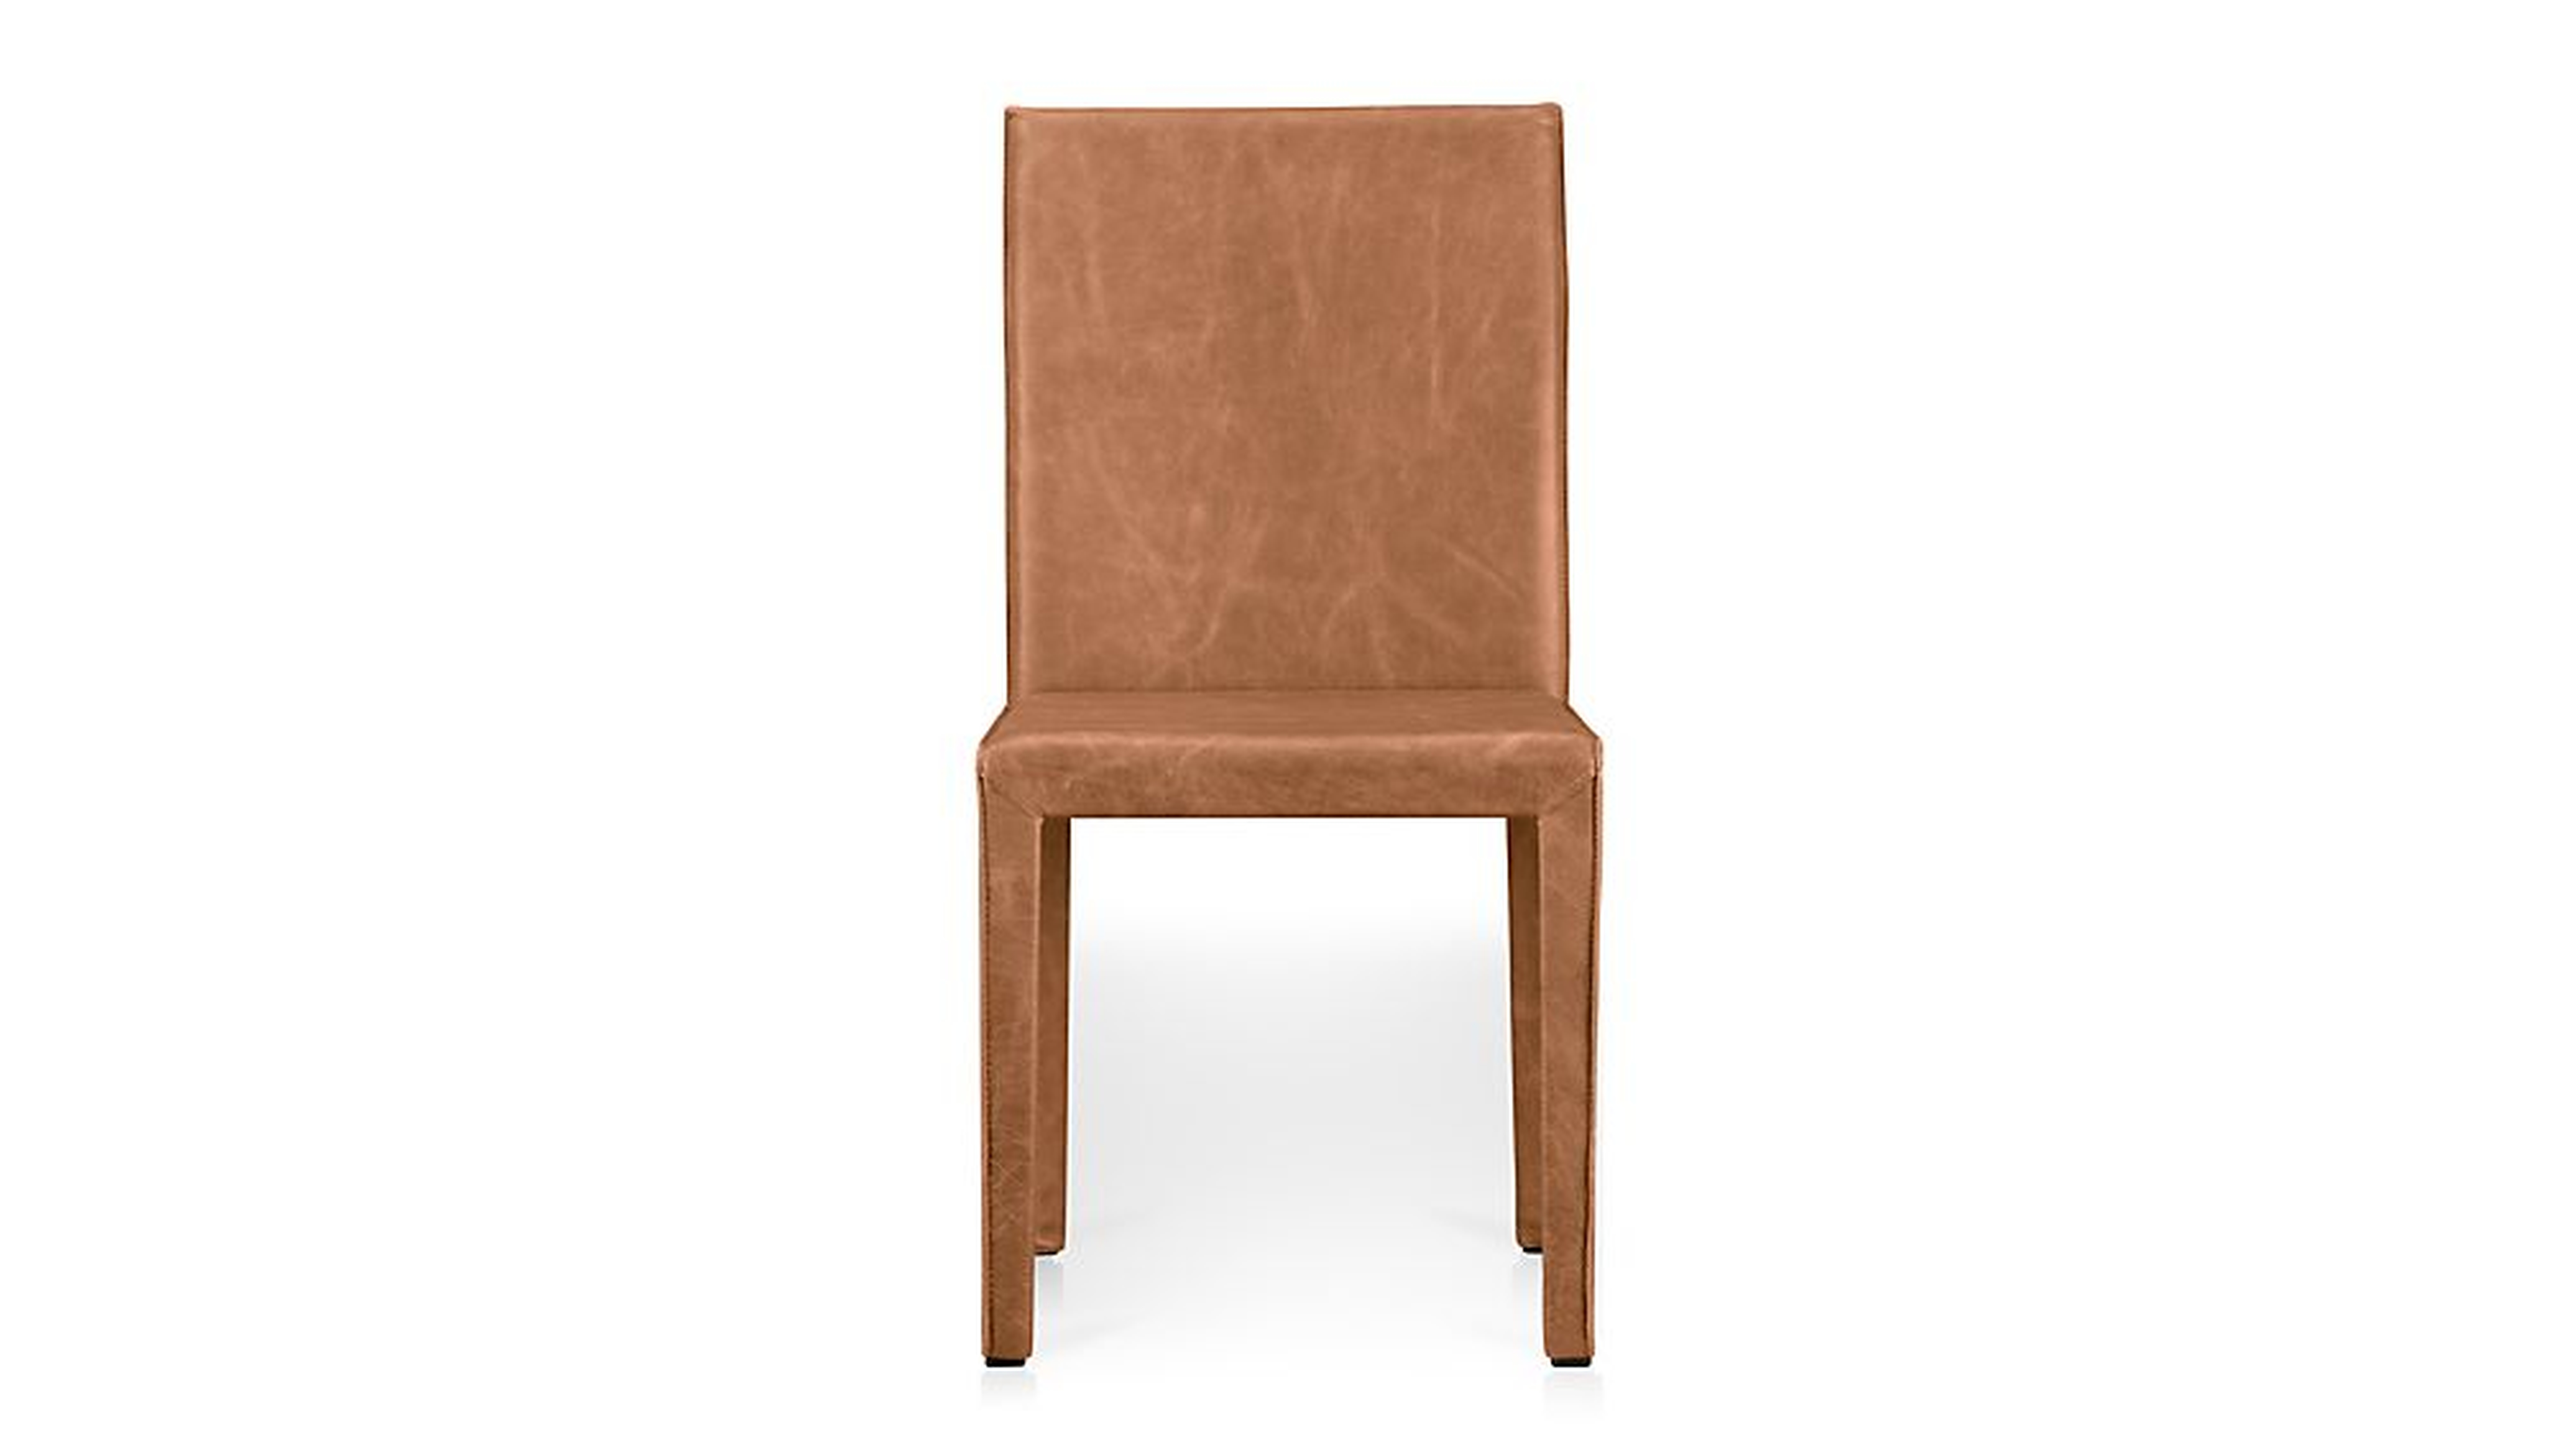 Folio Saddle Top-Grain Leather Dining Chair - Crate and Barrel